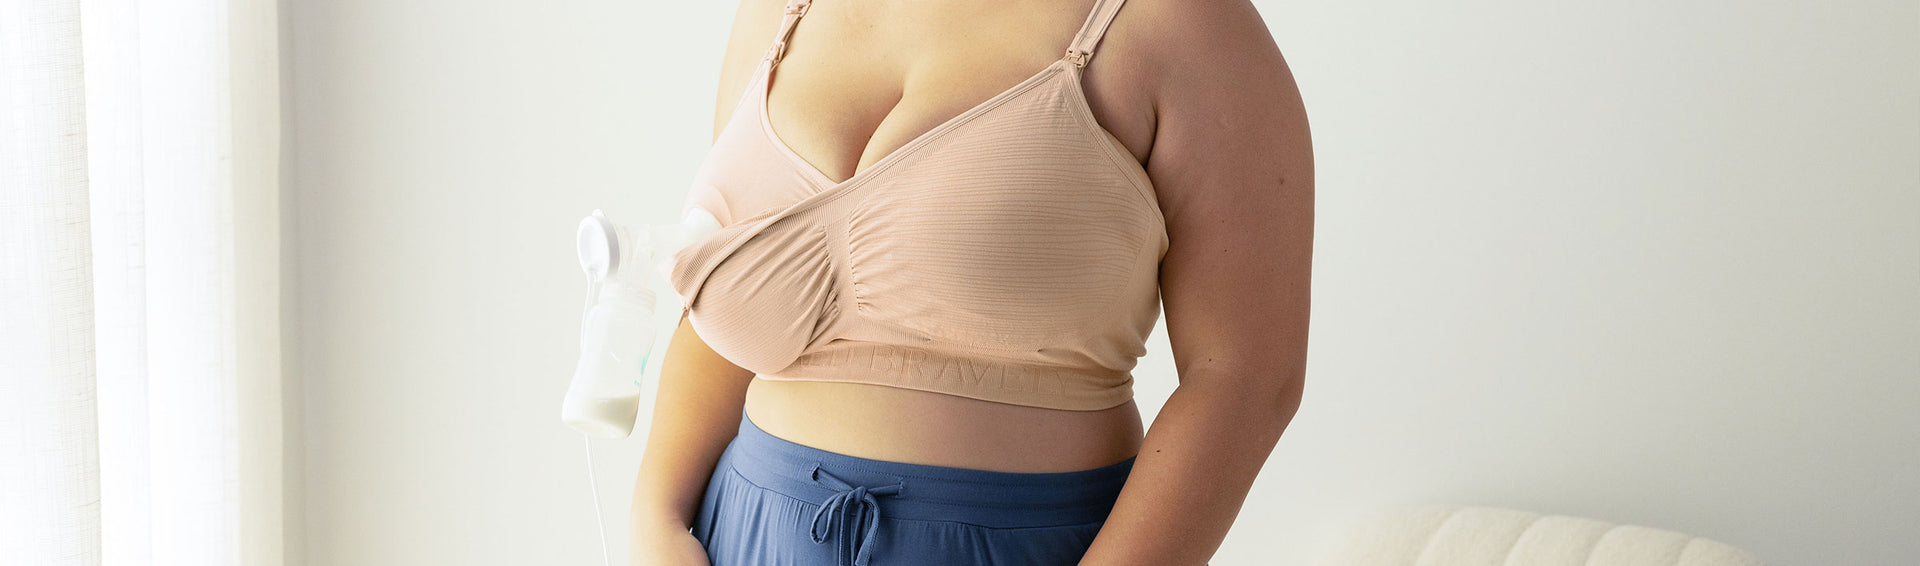 Simple Wishes - Our Super Mom All-in-One Bra is not only